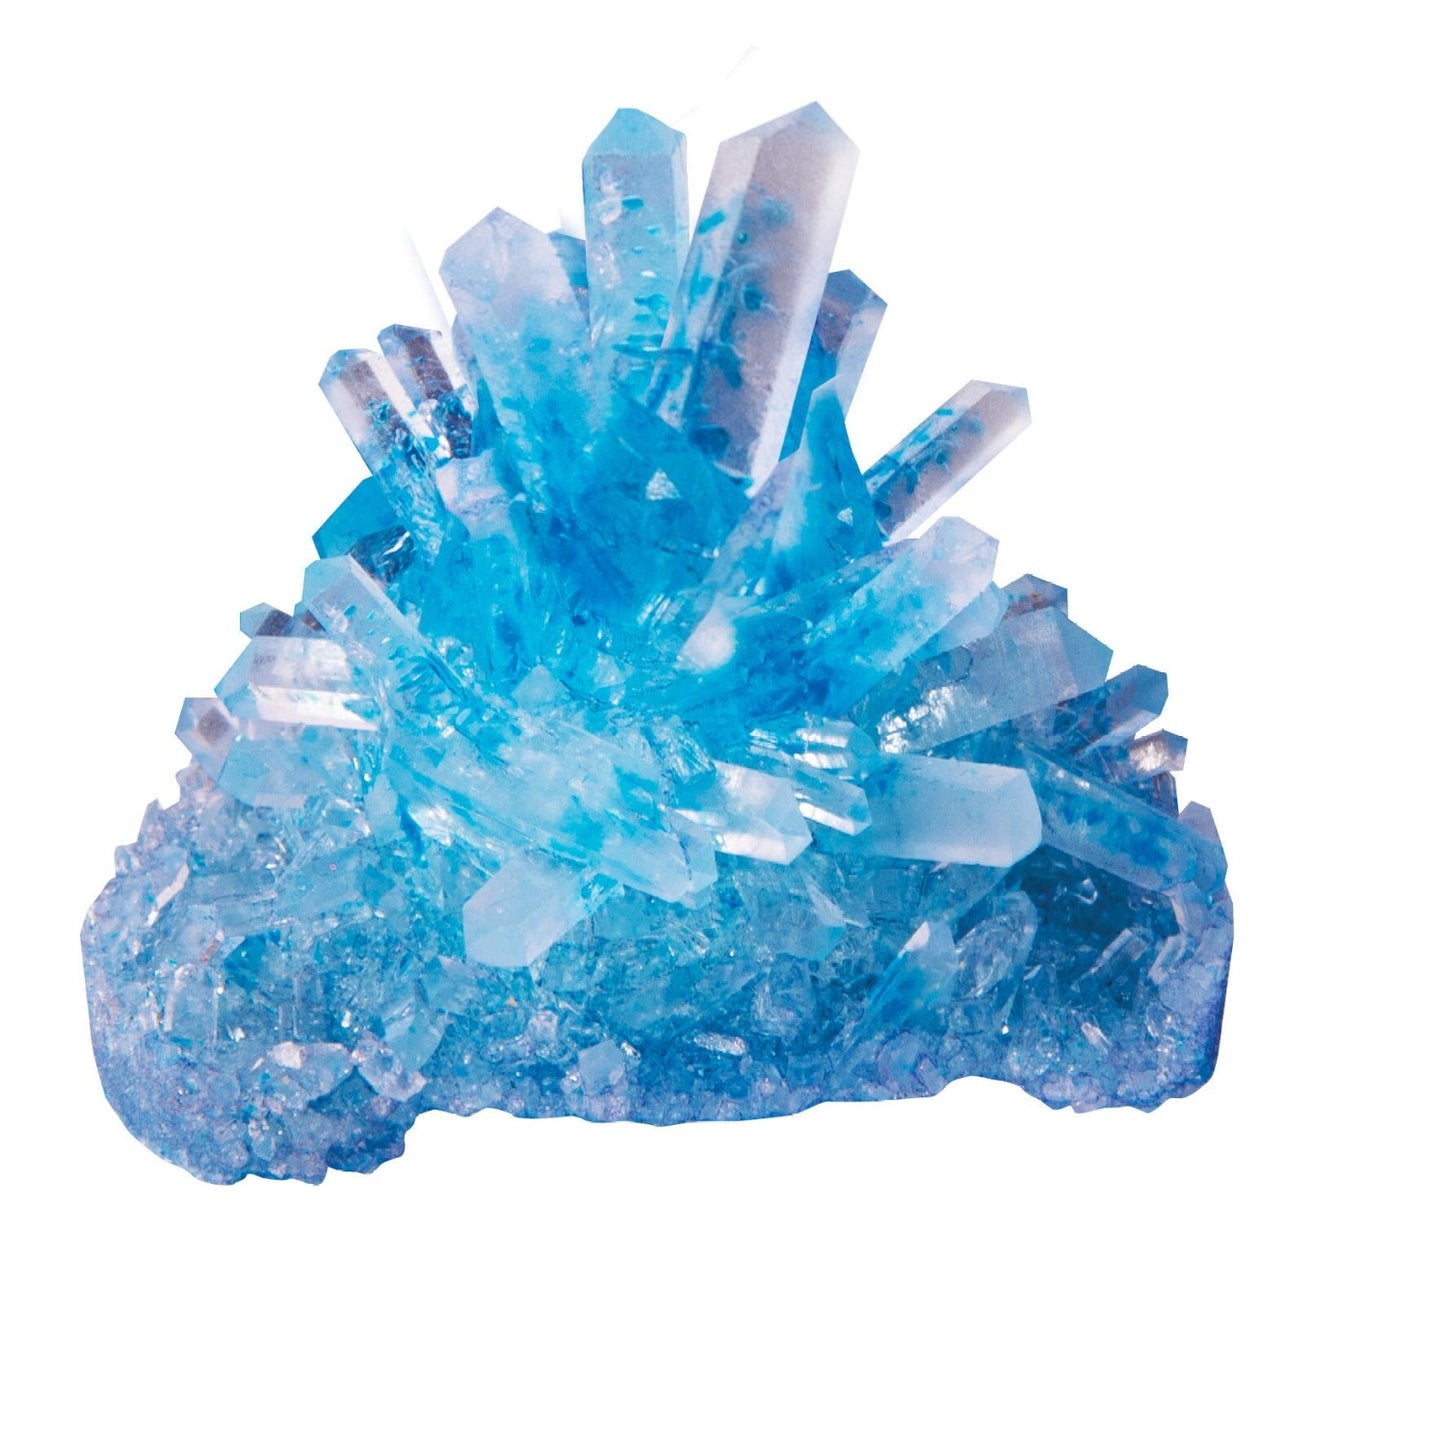 IS GIFT 3 in 1 Crystal Creation Kit - Grow Your Own Crystal